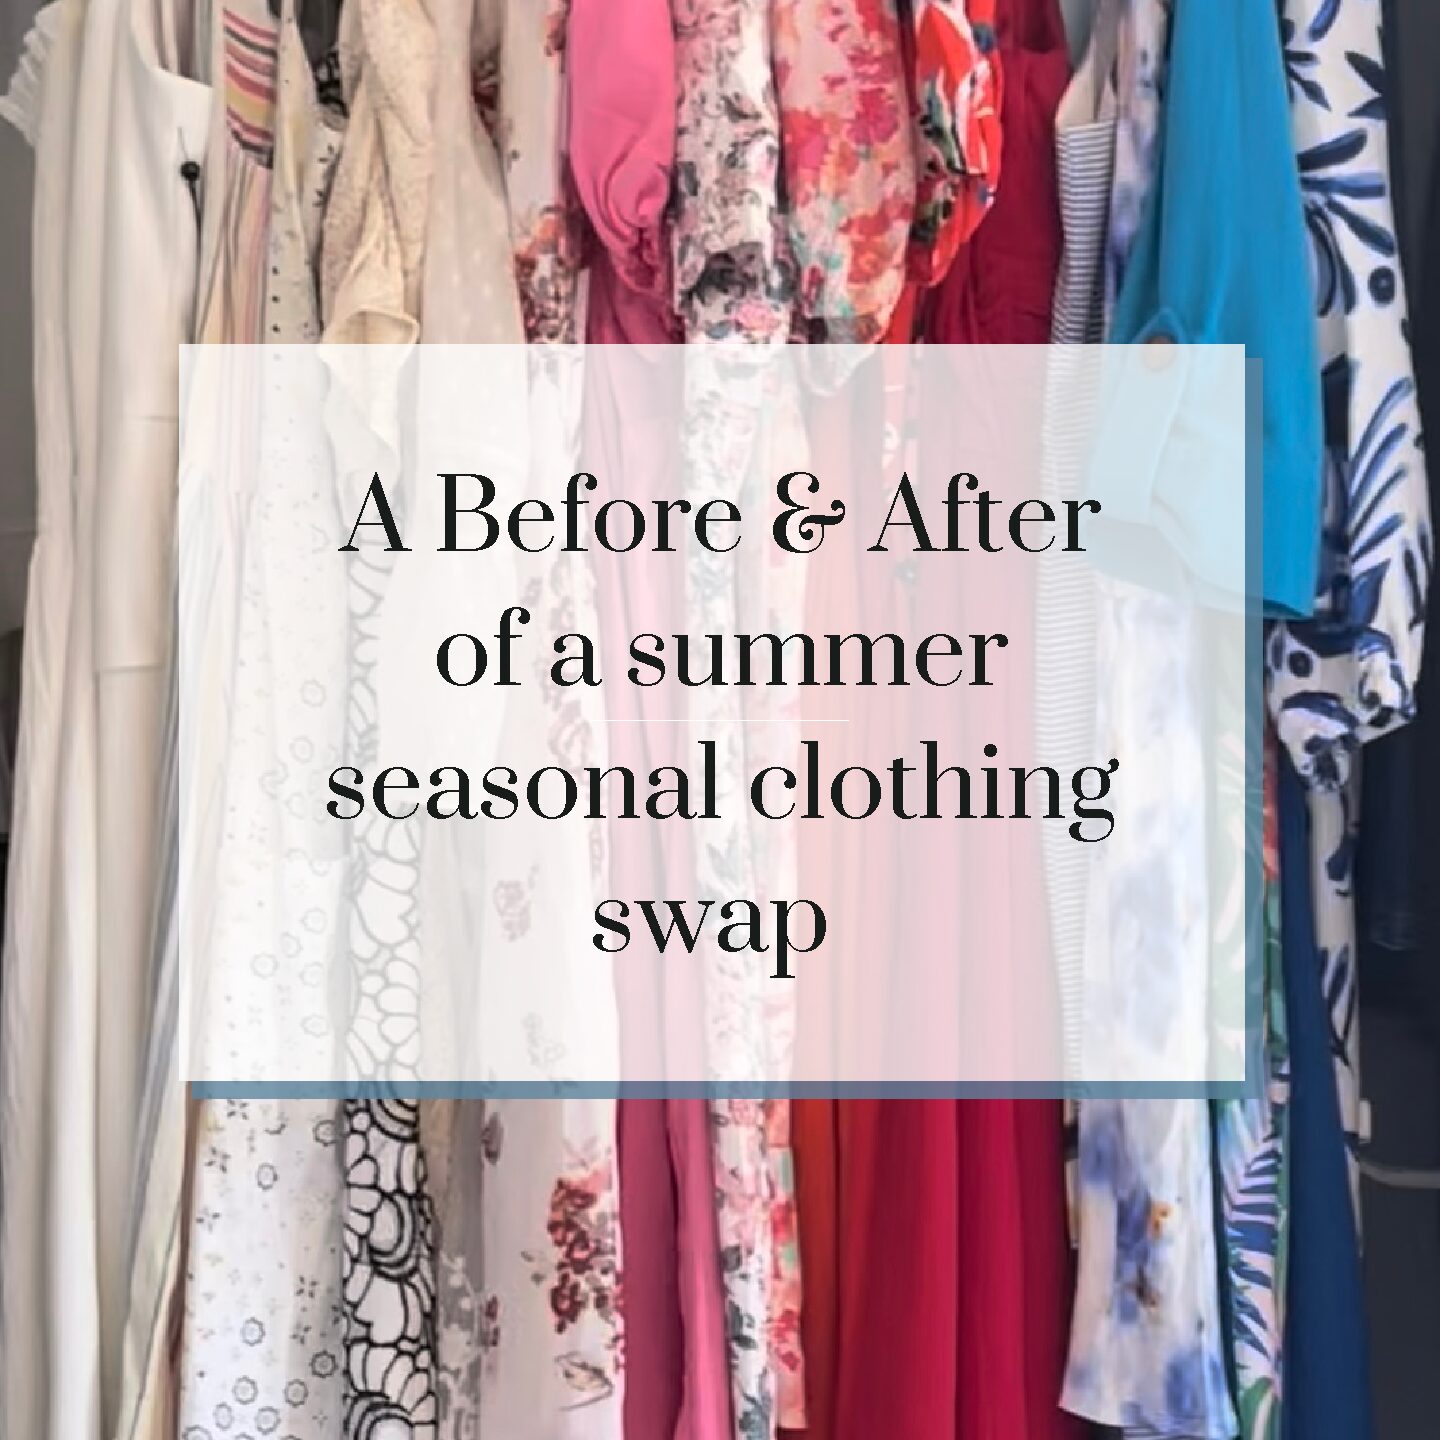 A Before & After of a summer seasonal clothing swap